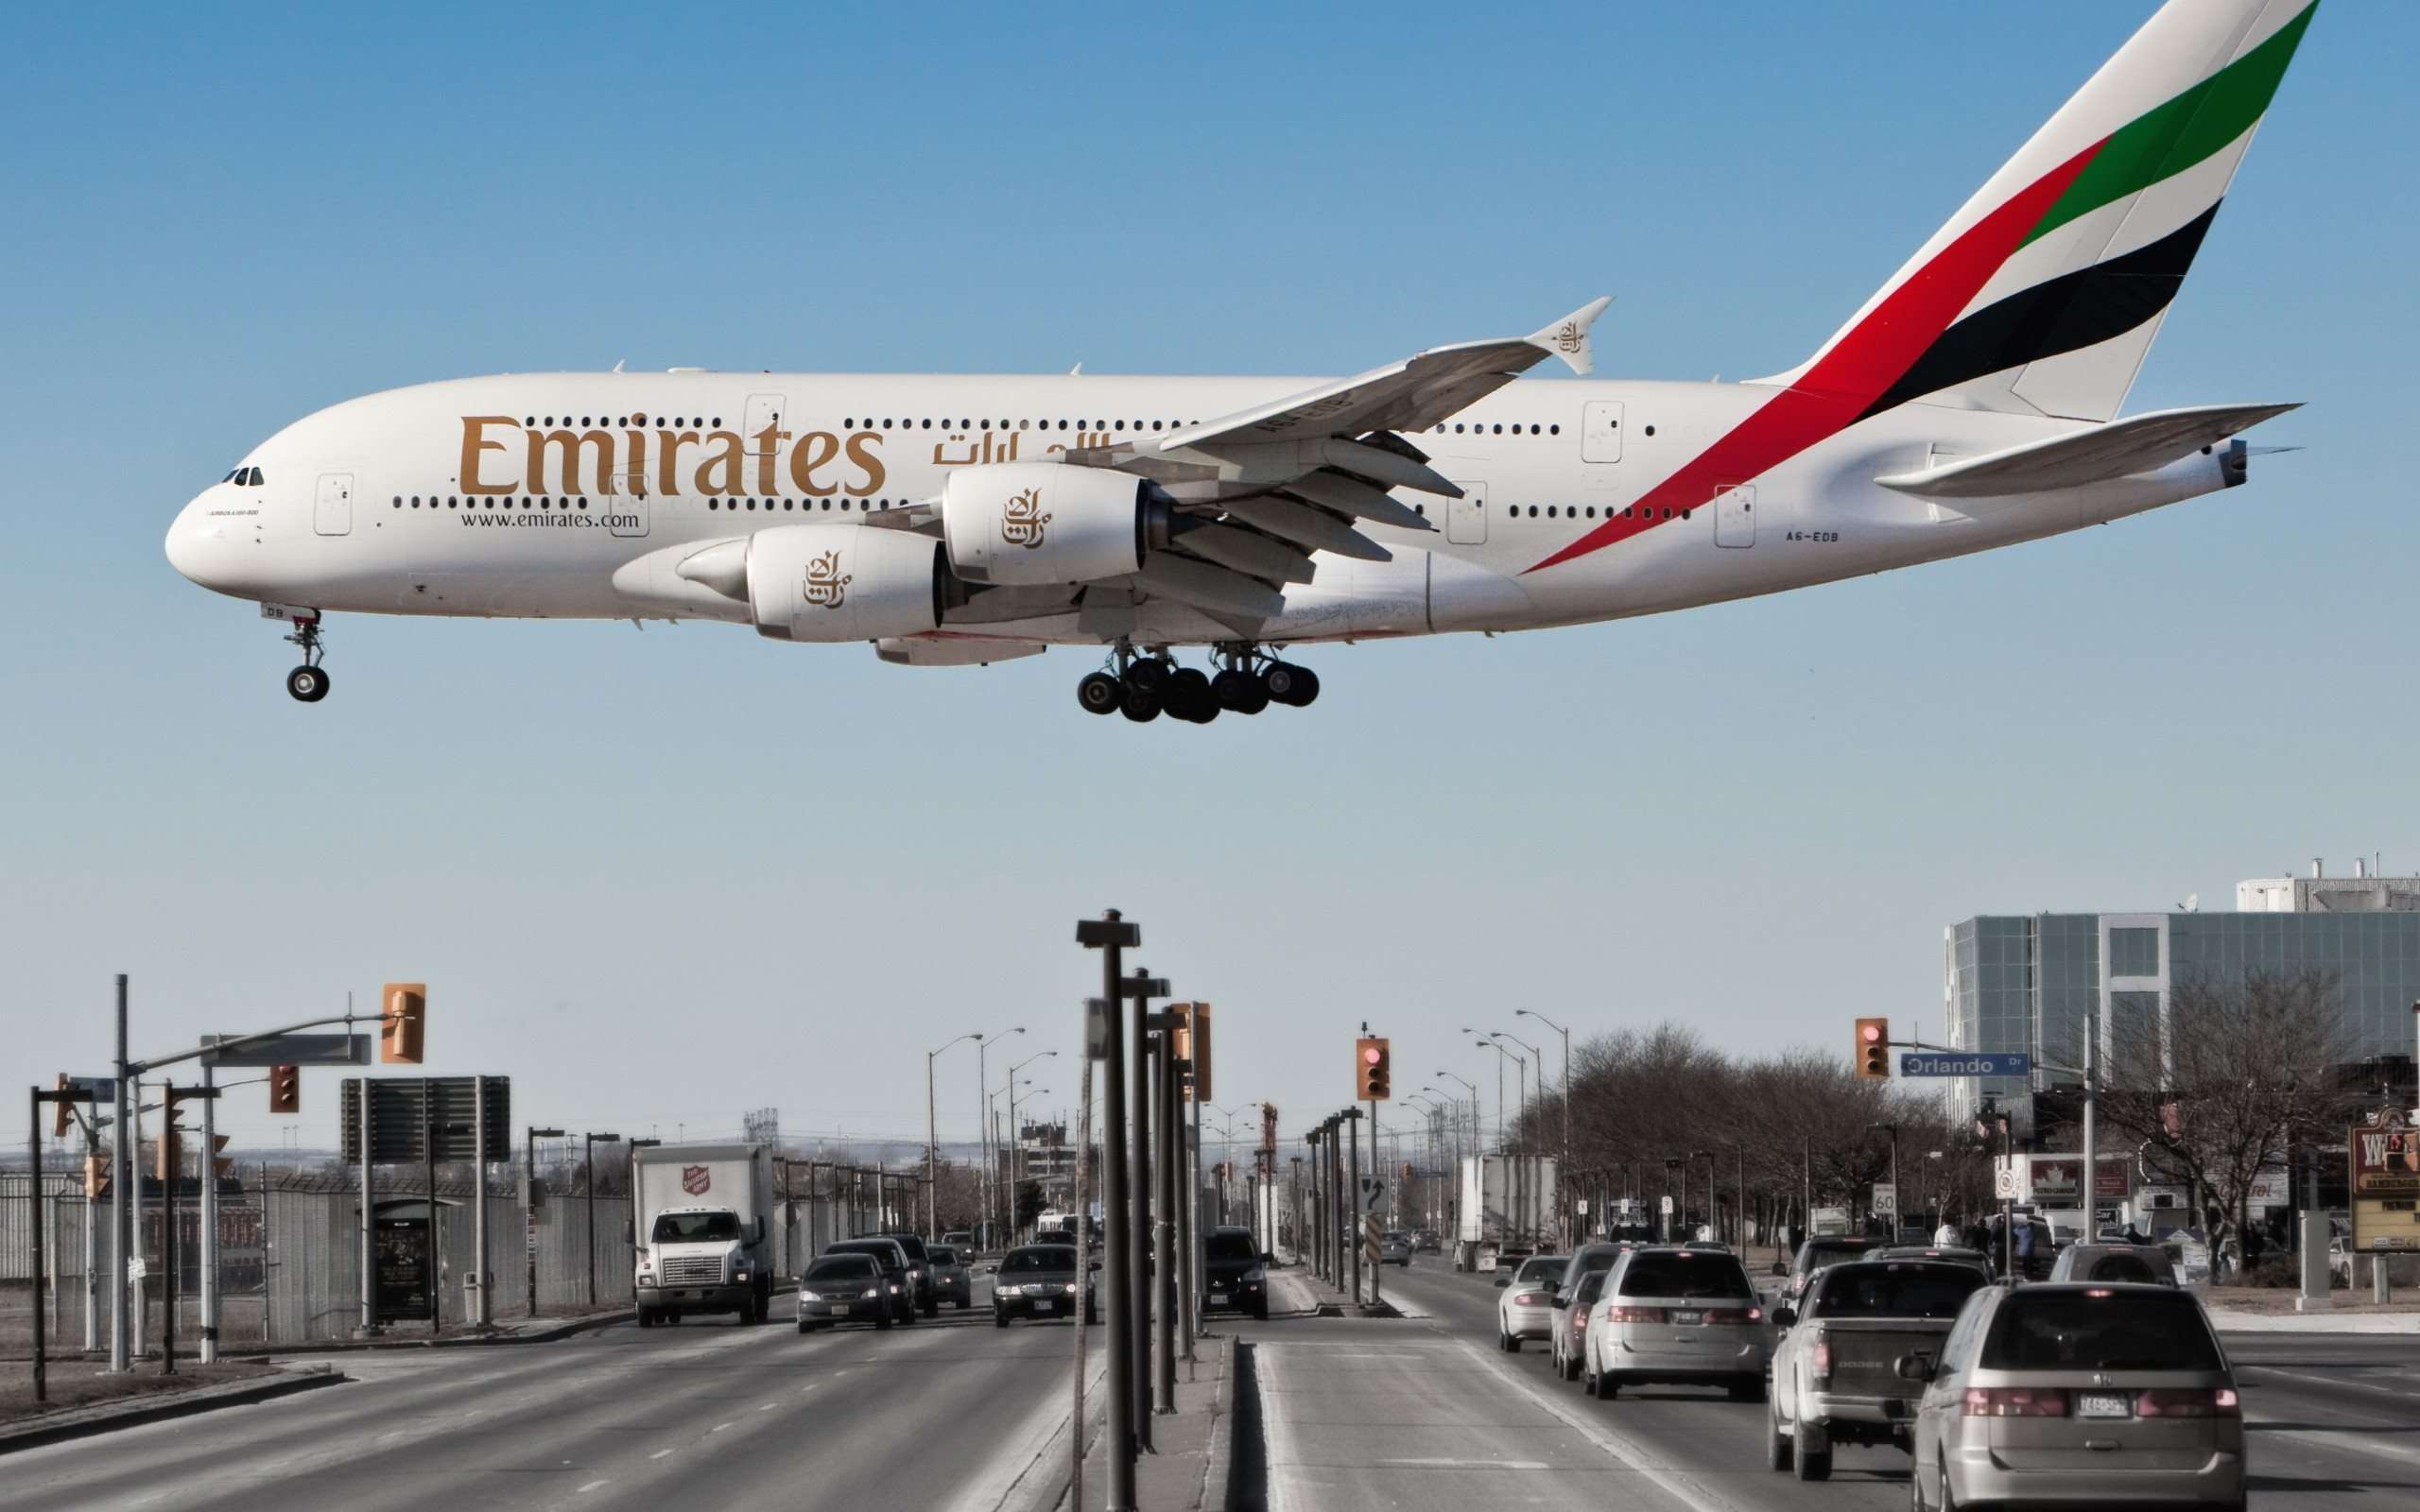 Vehicles Airbus A380 HD Wallpaper | Background Image